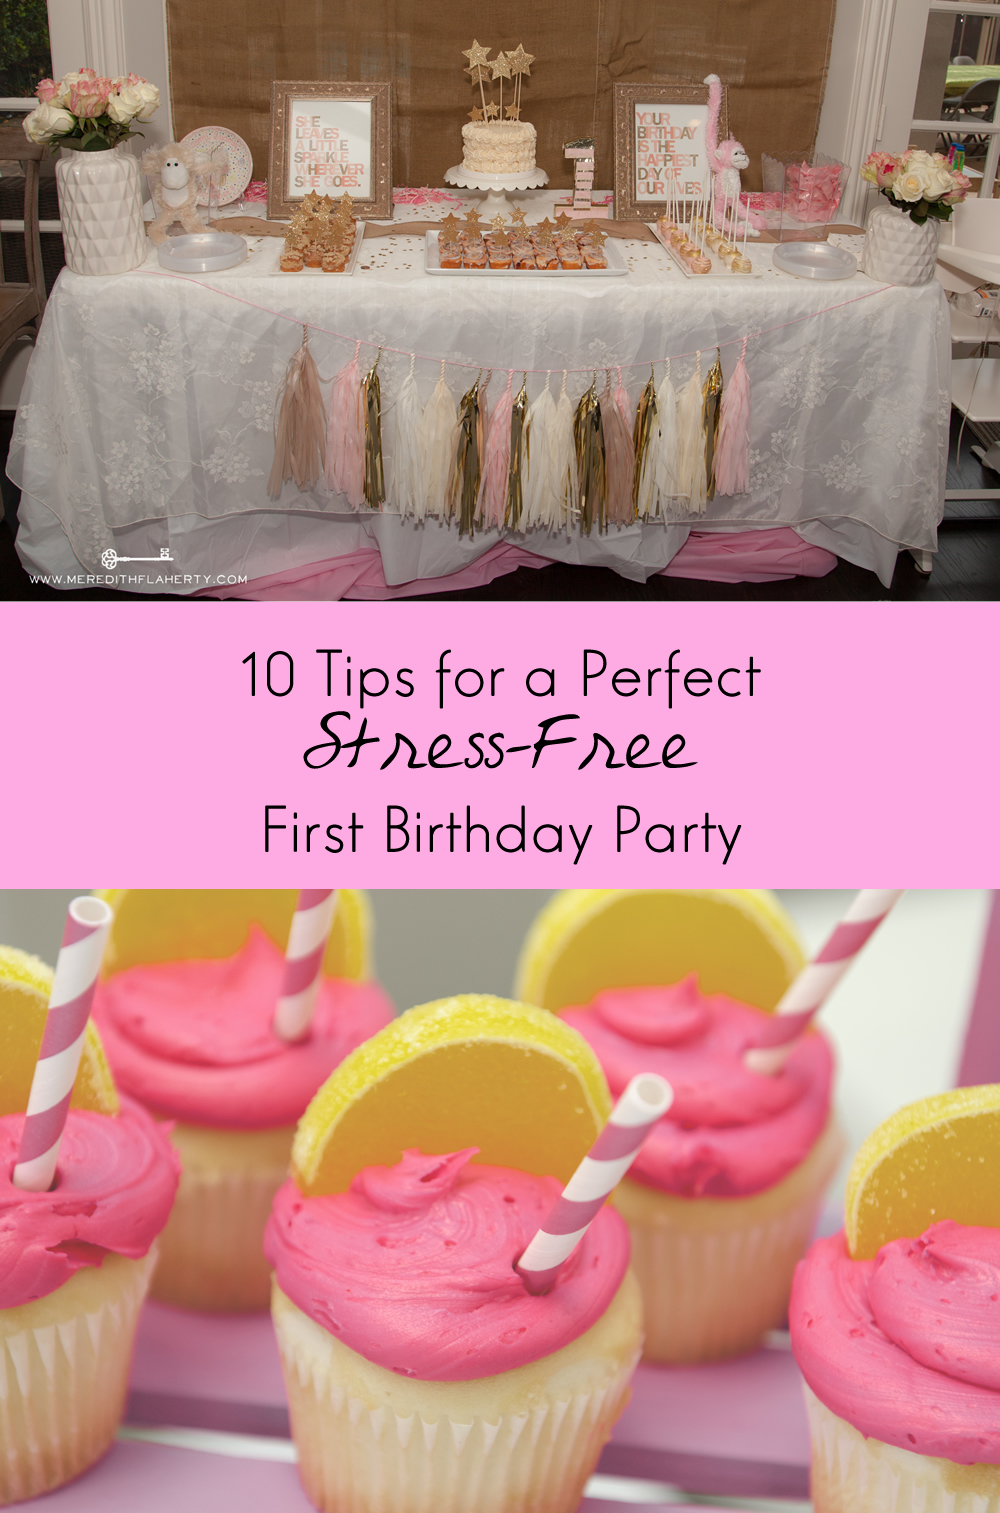 Tips & Ideas for Your Baby's First Birthday Party